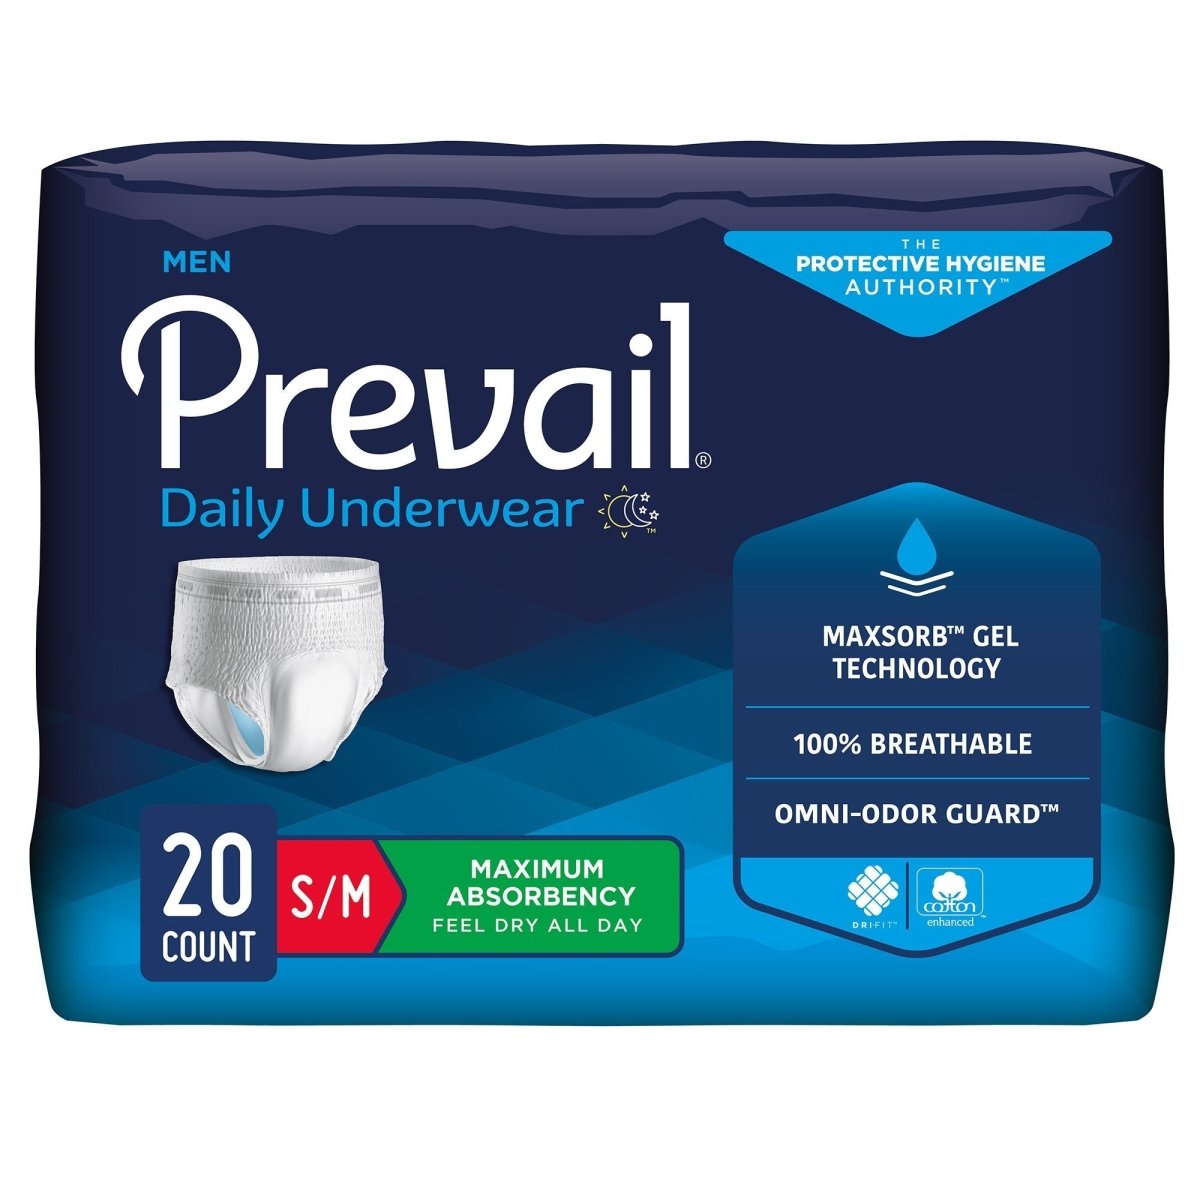 Managing Bowel Leaks? Learn the Best Men's Diapers for Fecal Incontinence.  Stay Dry and Confident.